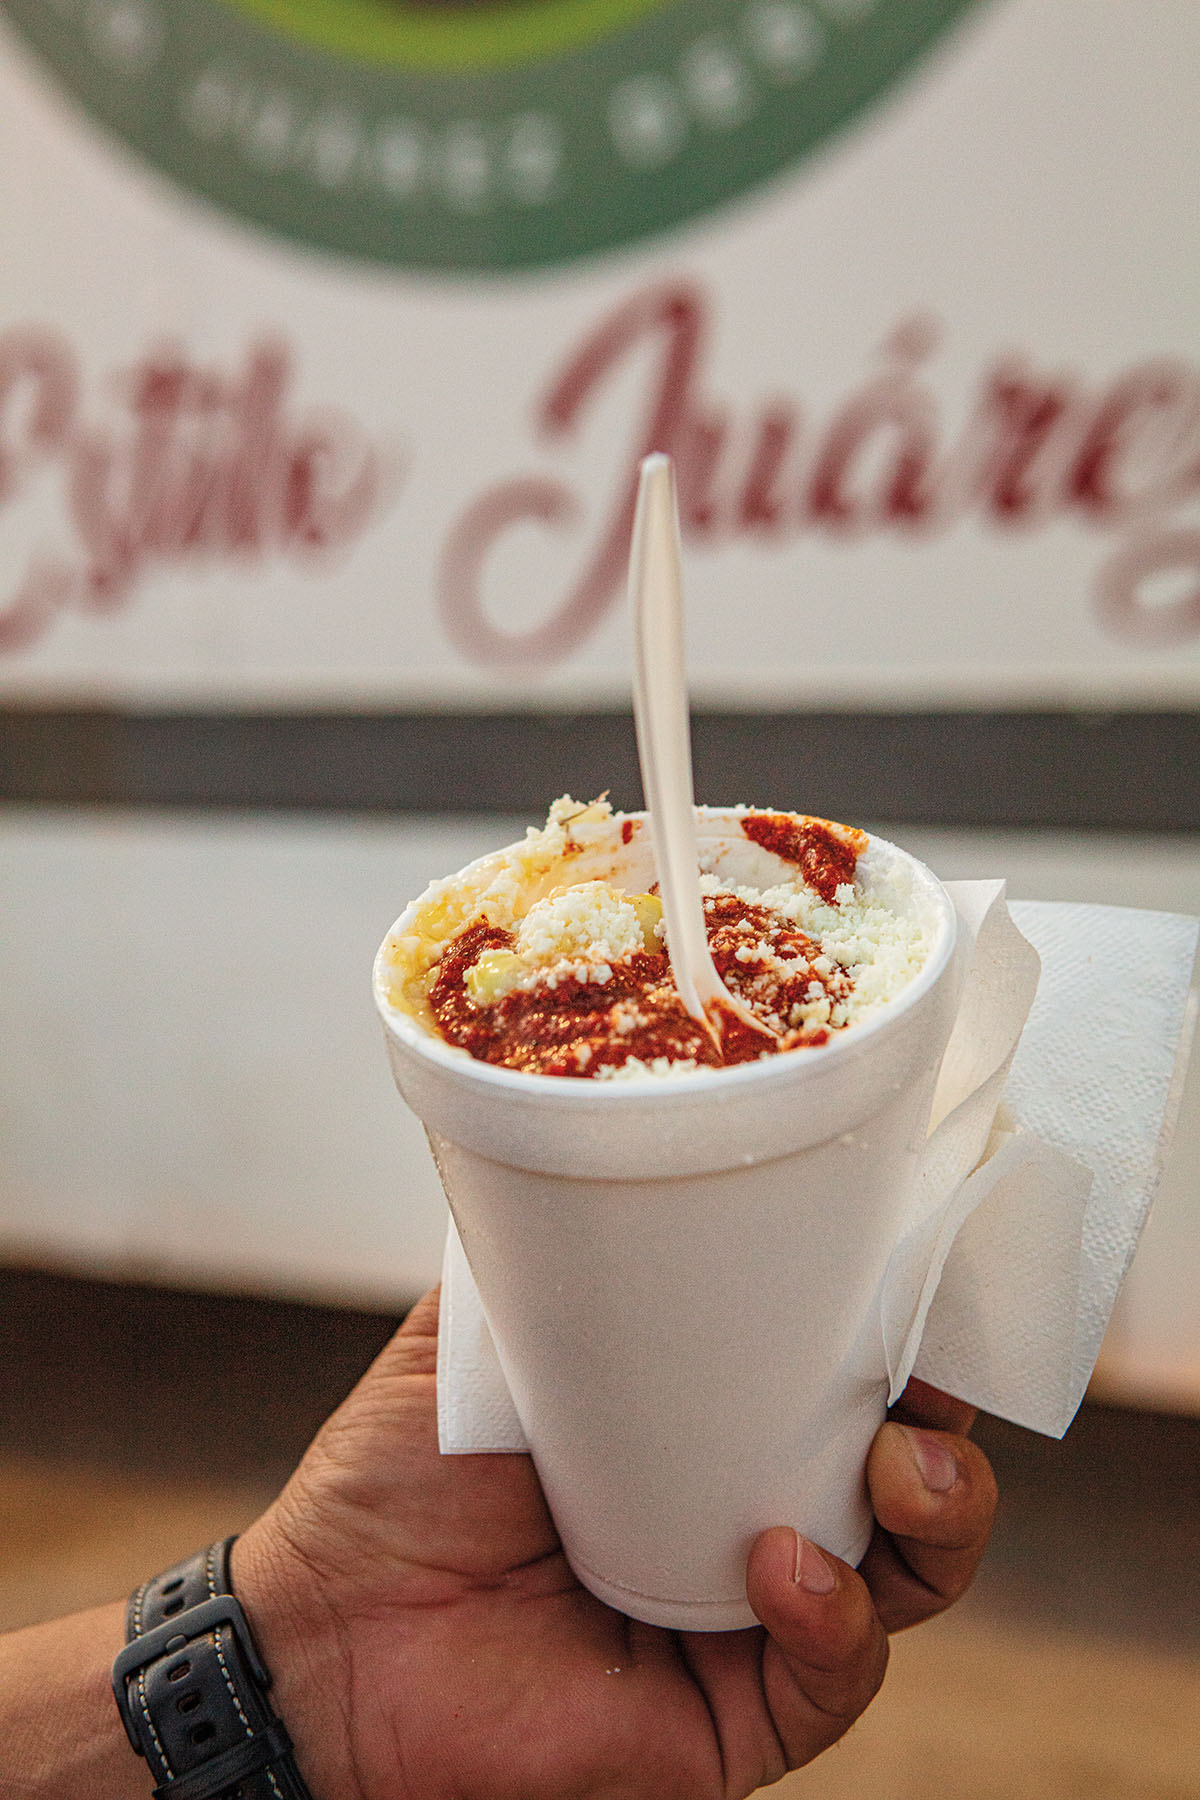 A hand holds a styrofoam cup filled full of corn, topped with red chile powder, cheese and a plastic spoon